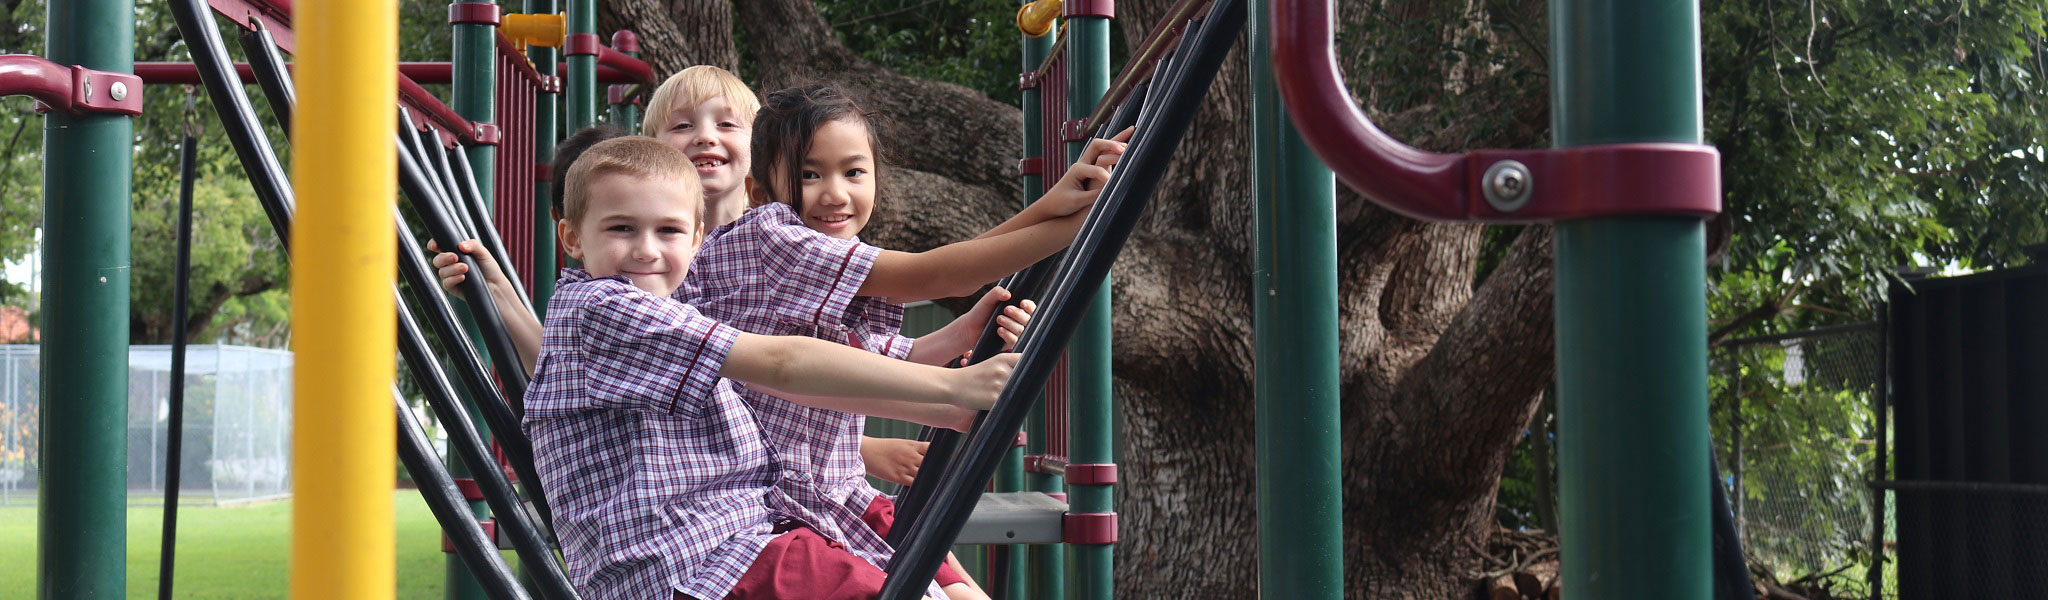 Students in playground